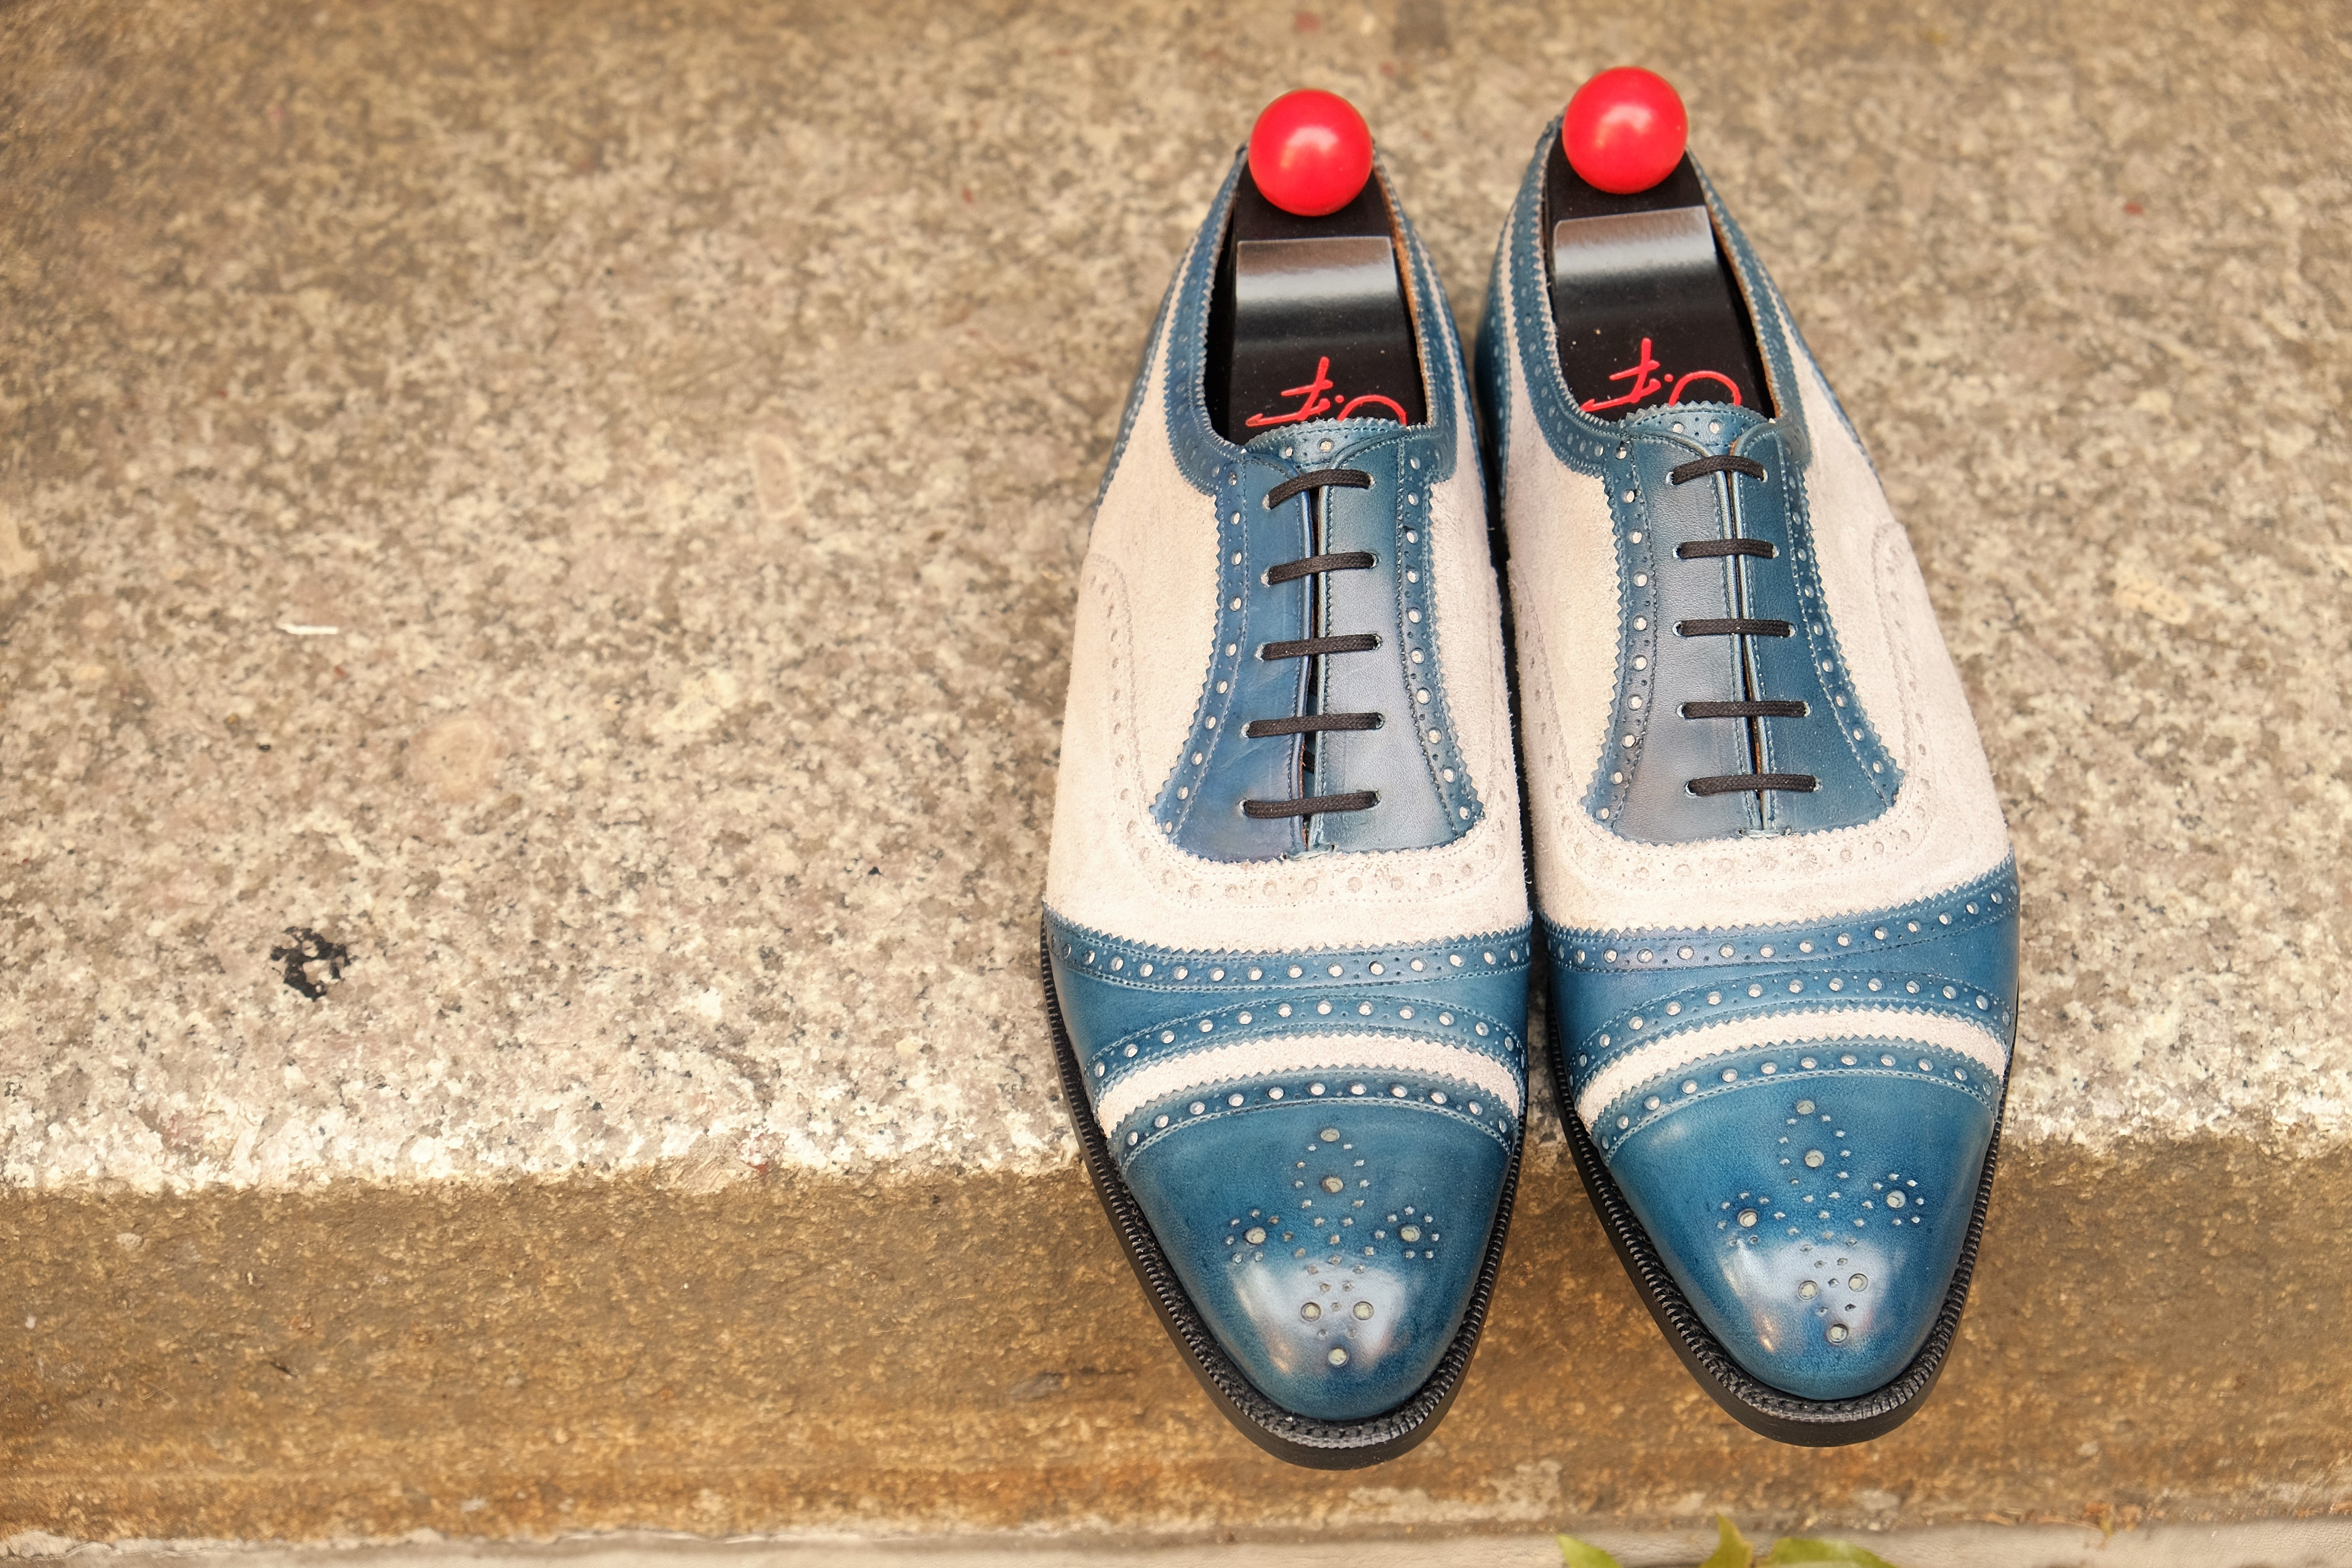 Phillips MTO - Shaded Teal Calf / Pearl Suede - NGT Last - Single Leather Sole